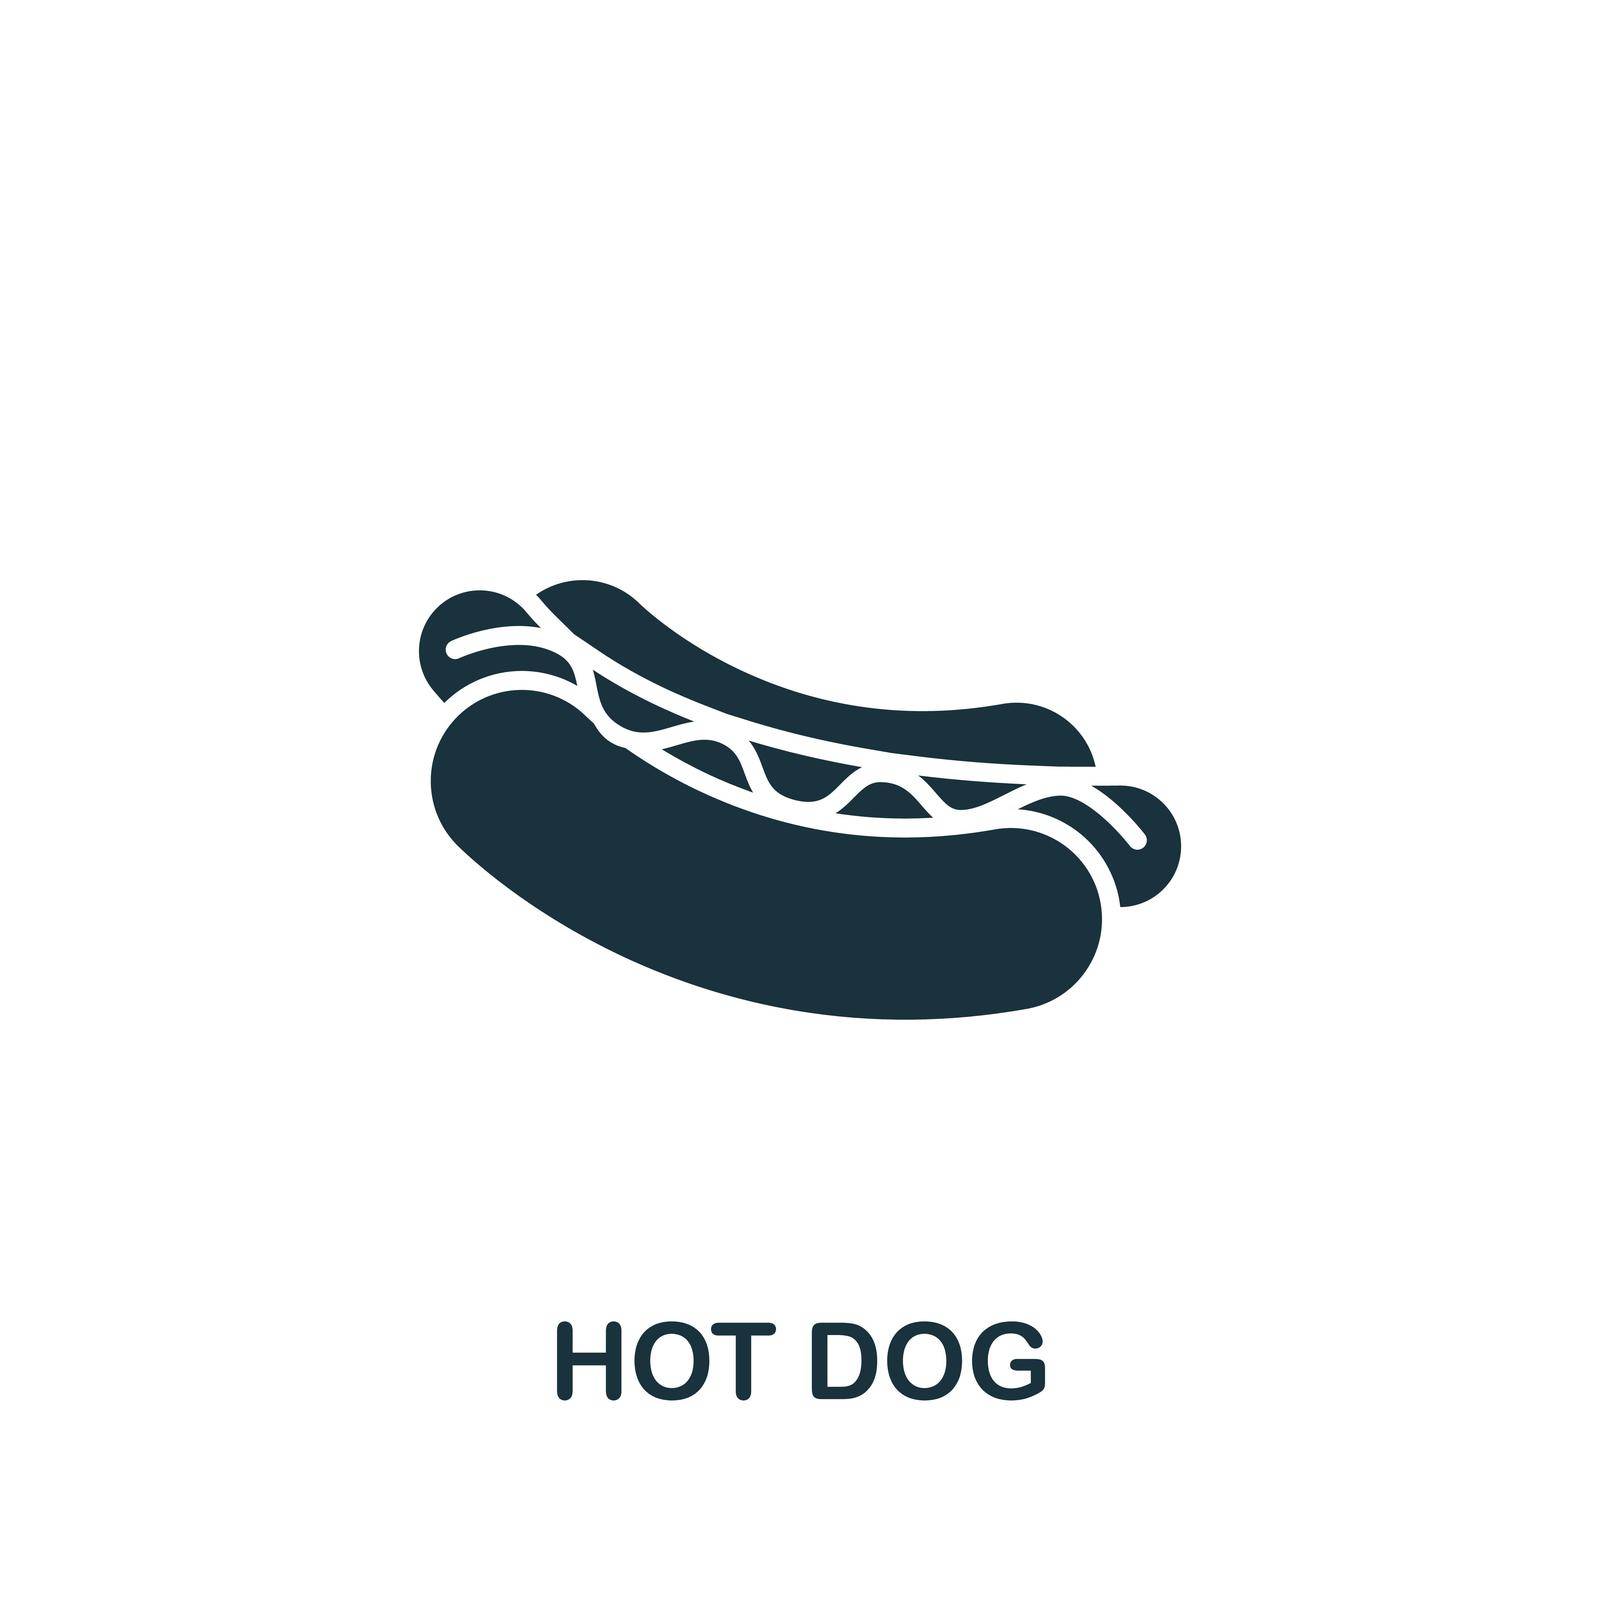 Hot Dog icon. Monochrome simple icon for templates, web design and infographics by simakovavector